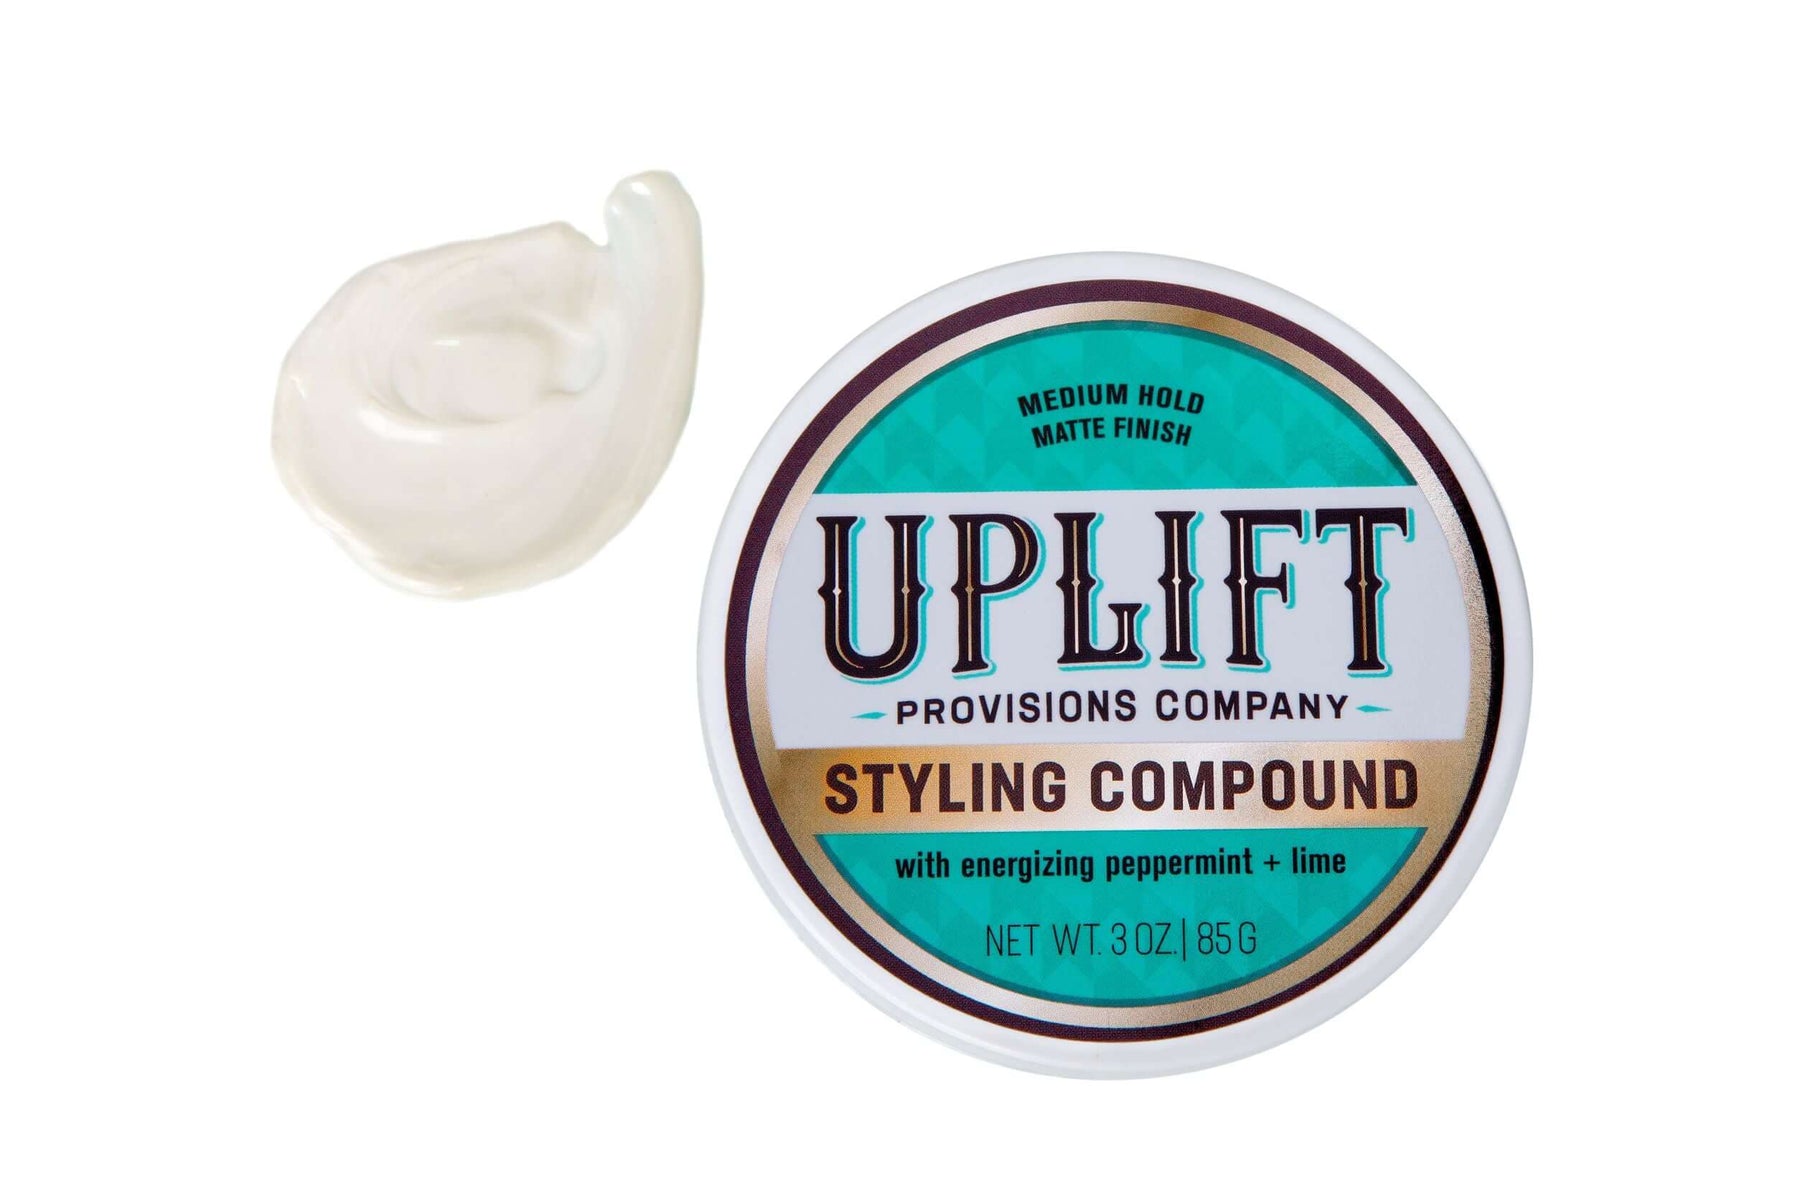 Uplift - Styling Compound - by Uplift Provisions Company |ProCare Outlet|